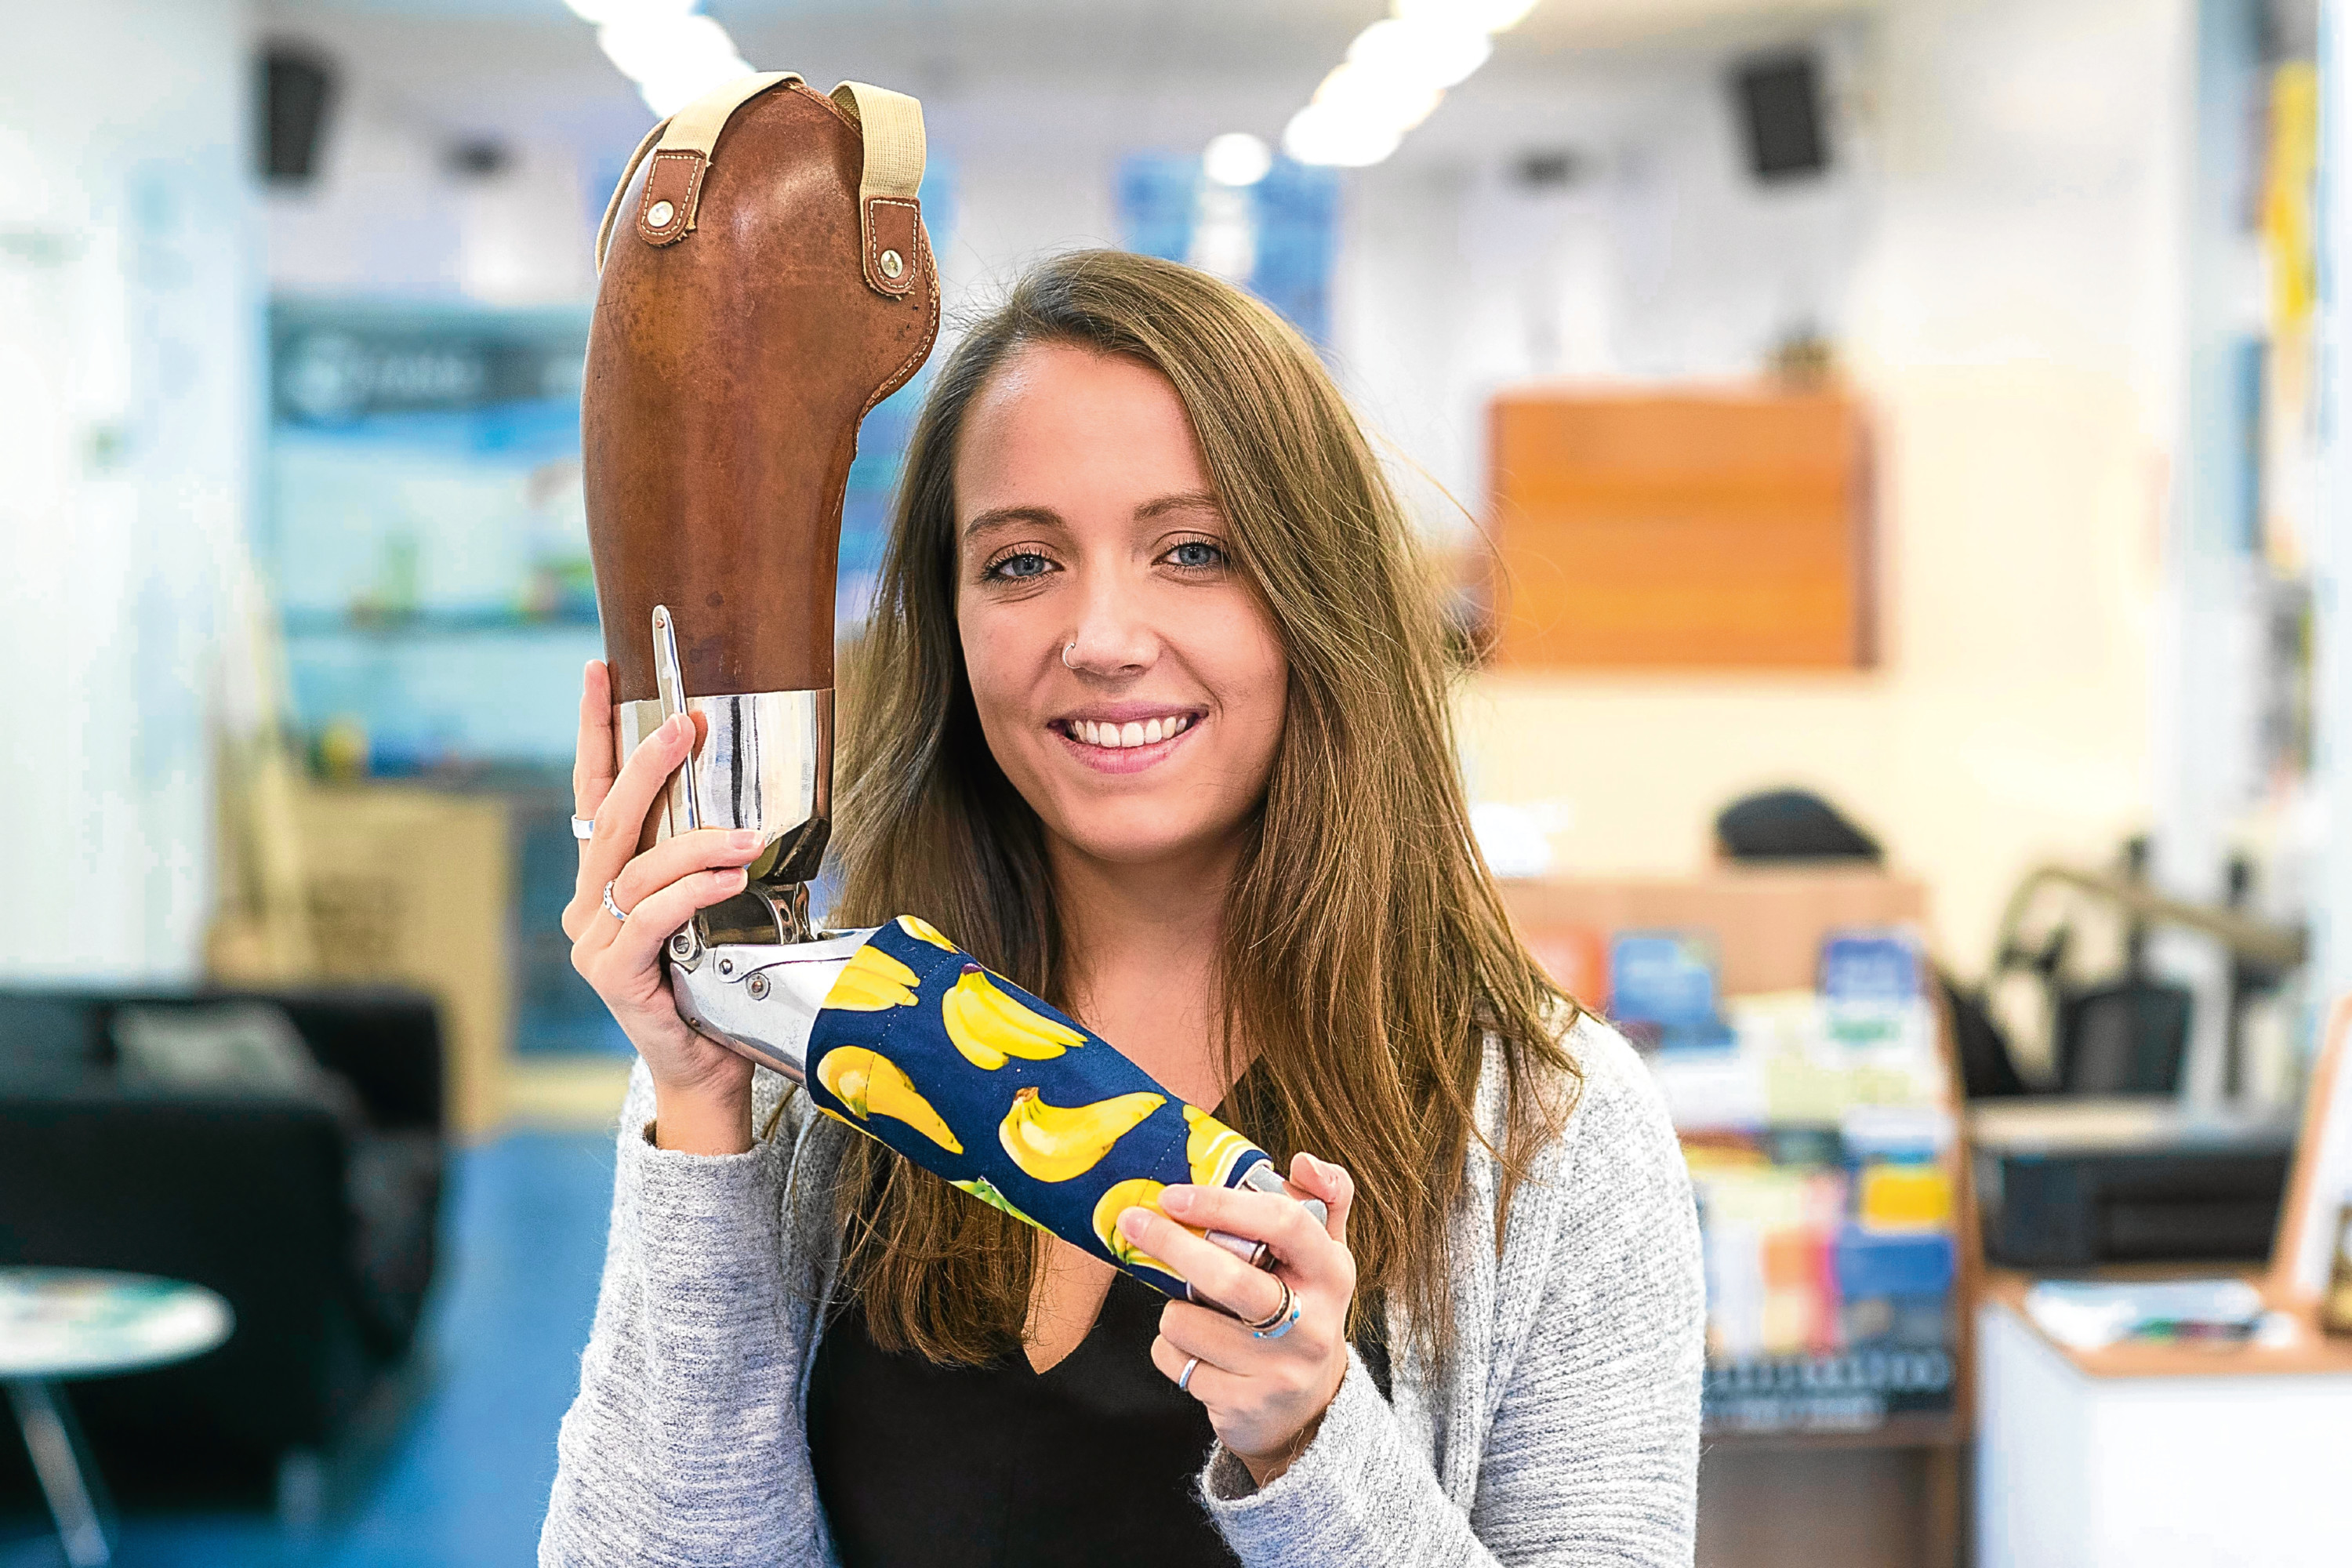 Eilidh Earle-Mitchell, a designer who has made covers for prosthetic limbs. (Derek Ironside / Newsline Media)